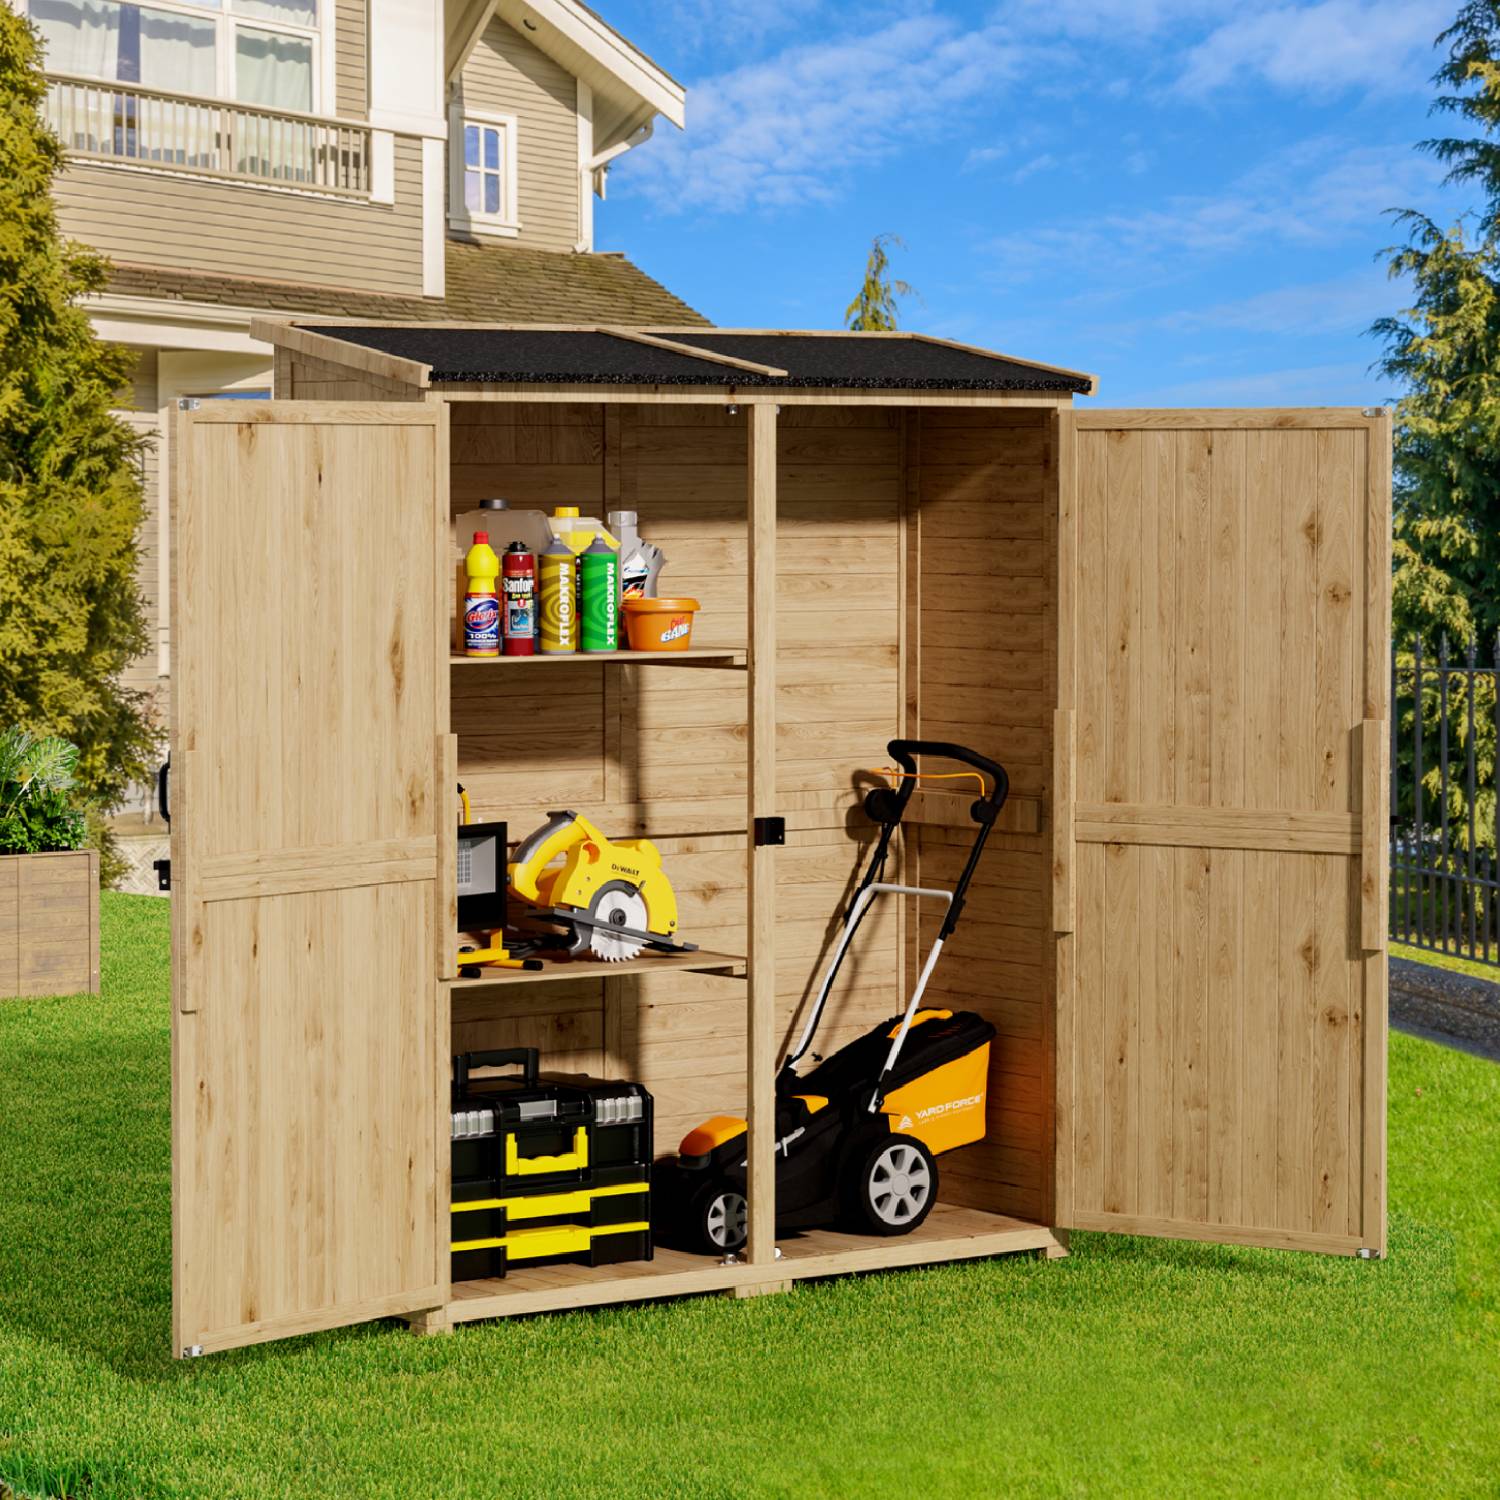 Gizoon CC40 Outdoor Wooden Storage Cabinet with Waterproof Roof, Lockable Doors and 2 Removable Shelves